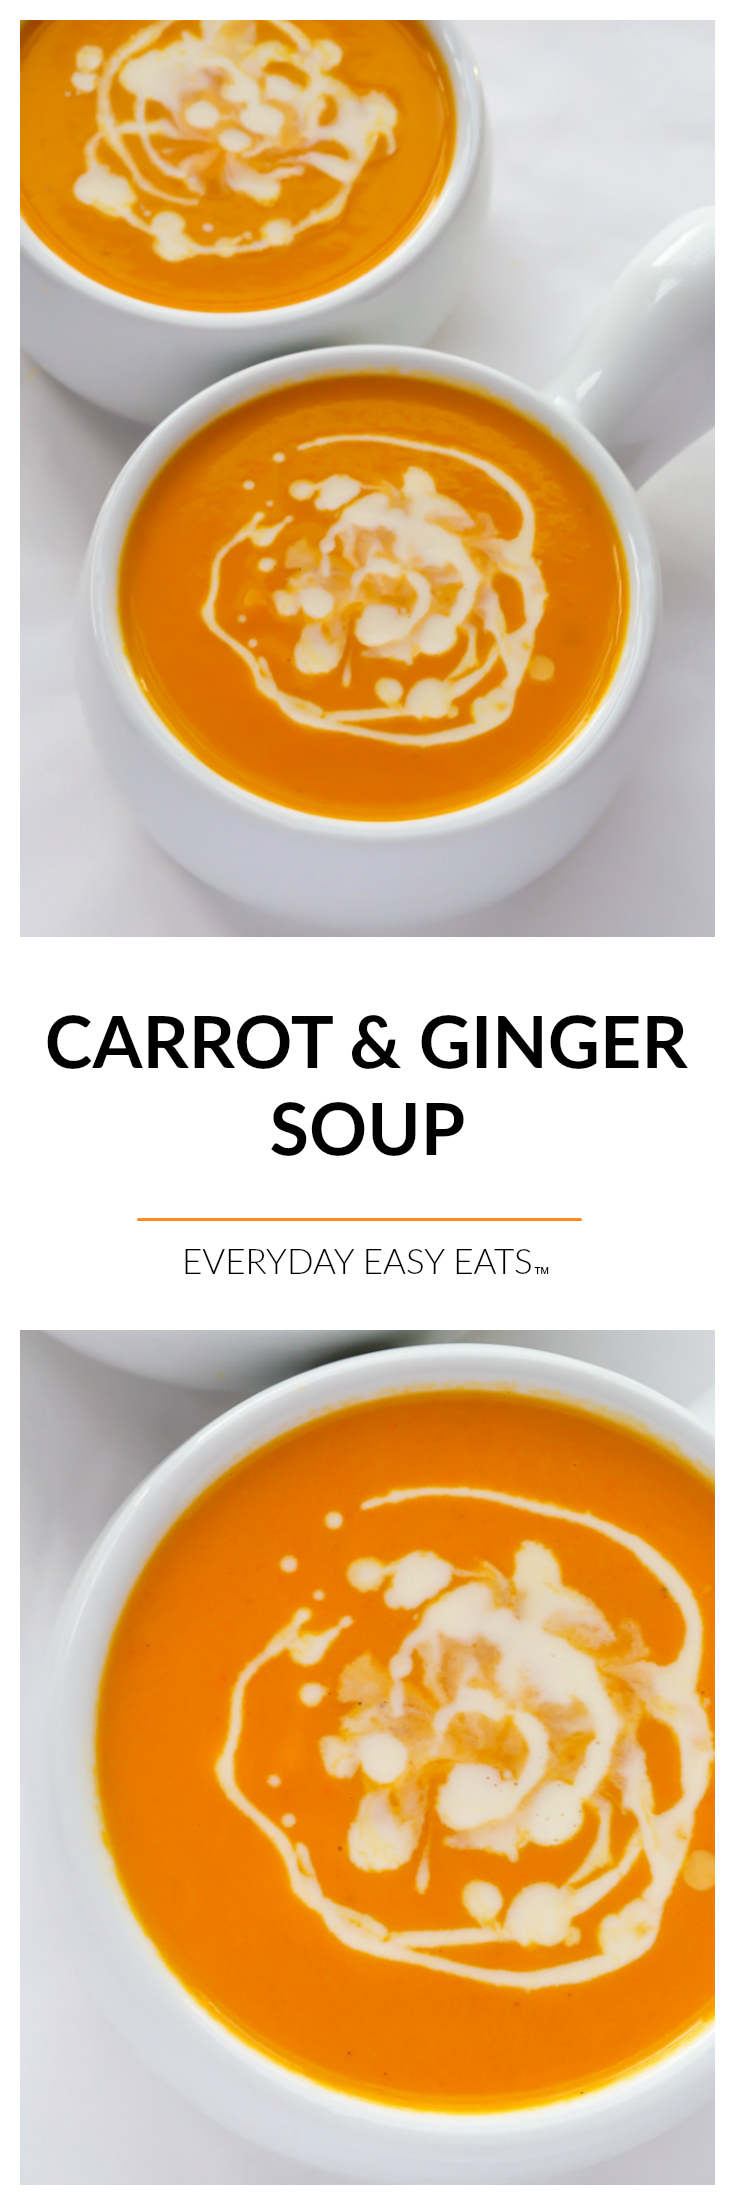 Carrot Ginger Coconut Soup - This easy & healthy soup recipe is vegan, gluten-free, dairy-free and paleo. Perfect for lunch or dinner!